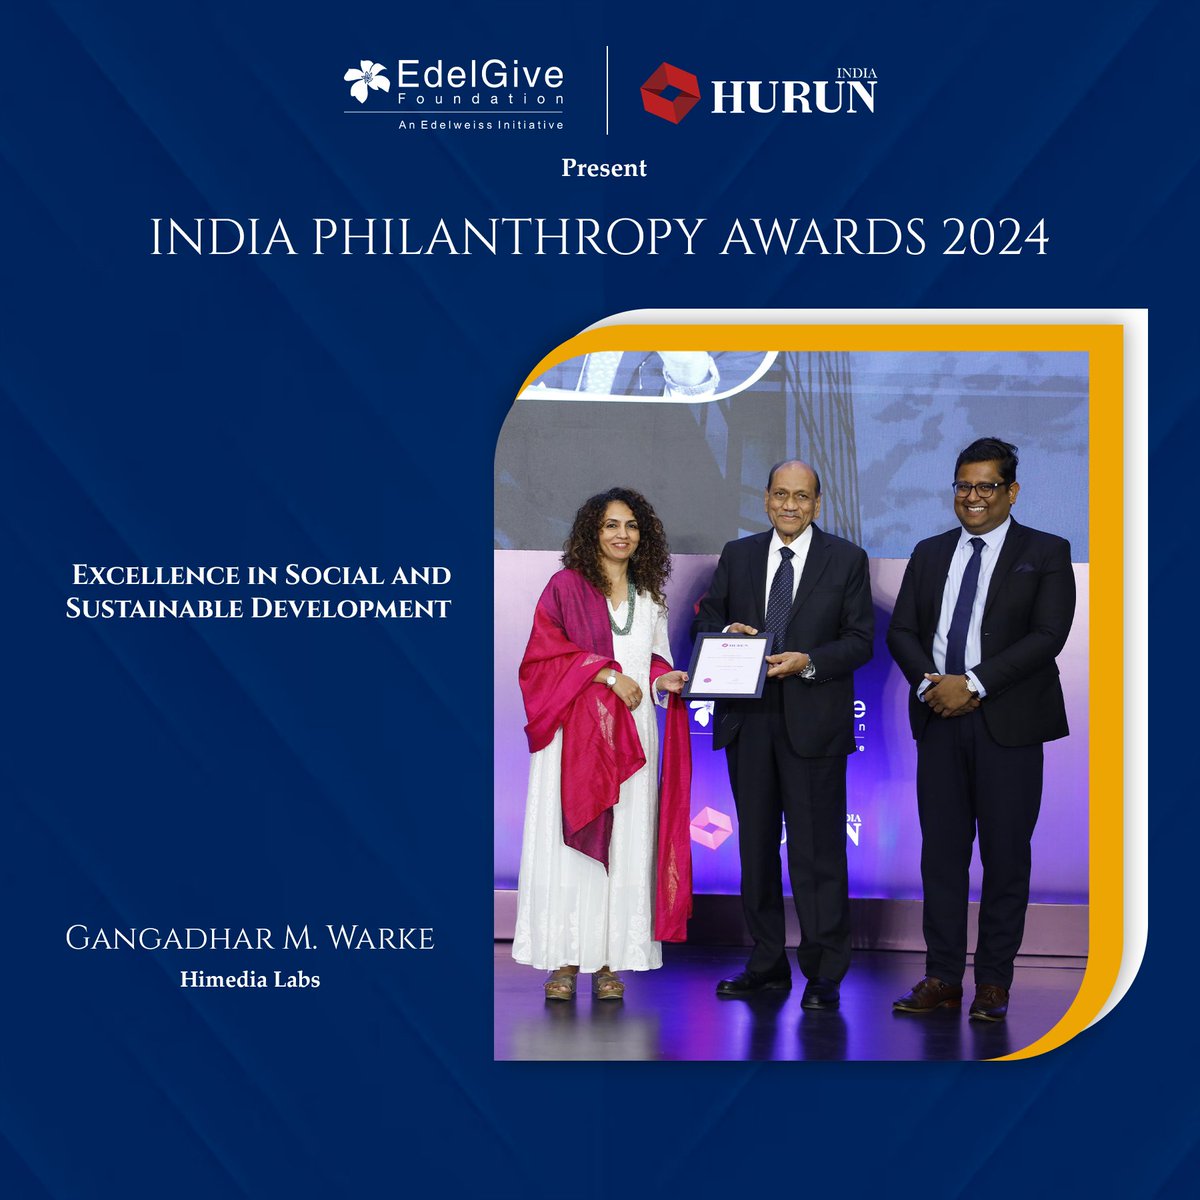 Gangadhar M. Warke, Himedia Labs receiving the Excellence in Social and Sustainable Development. #IndiaPhilanthropyAwards2024 #PhilanthropyIndia #GivingBackIndia #CelebrateGiving #IndiaGives #IPALive #HonoringHeroes #SocialImpactIndia